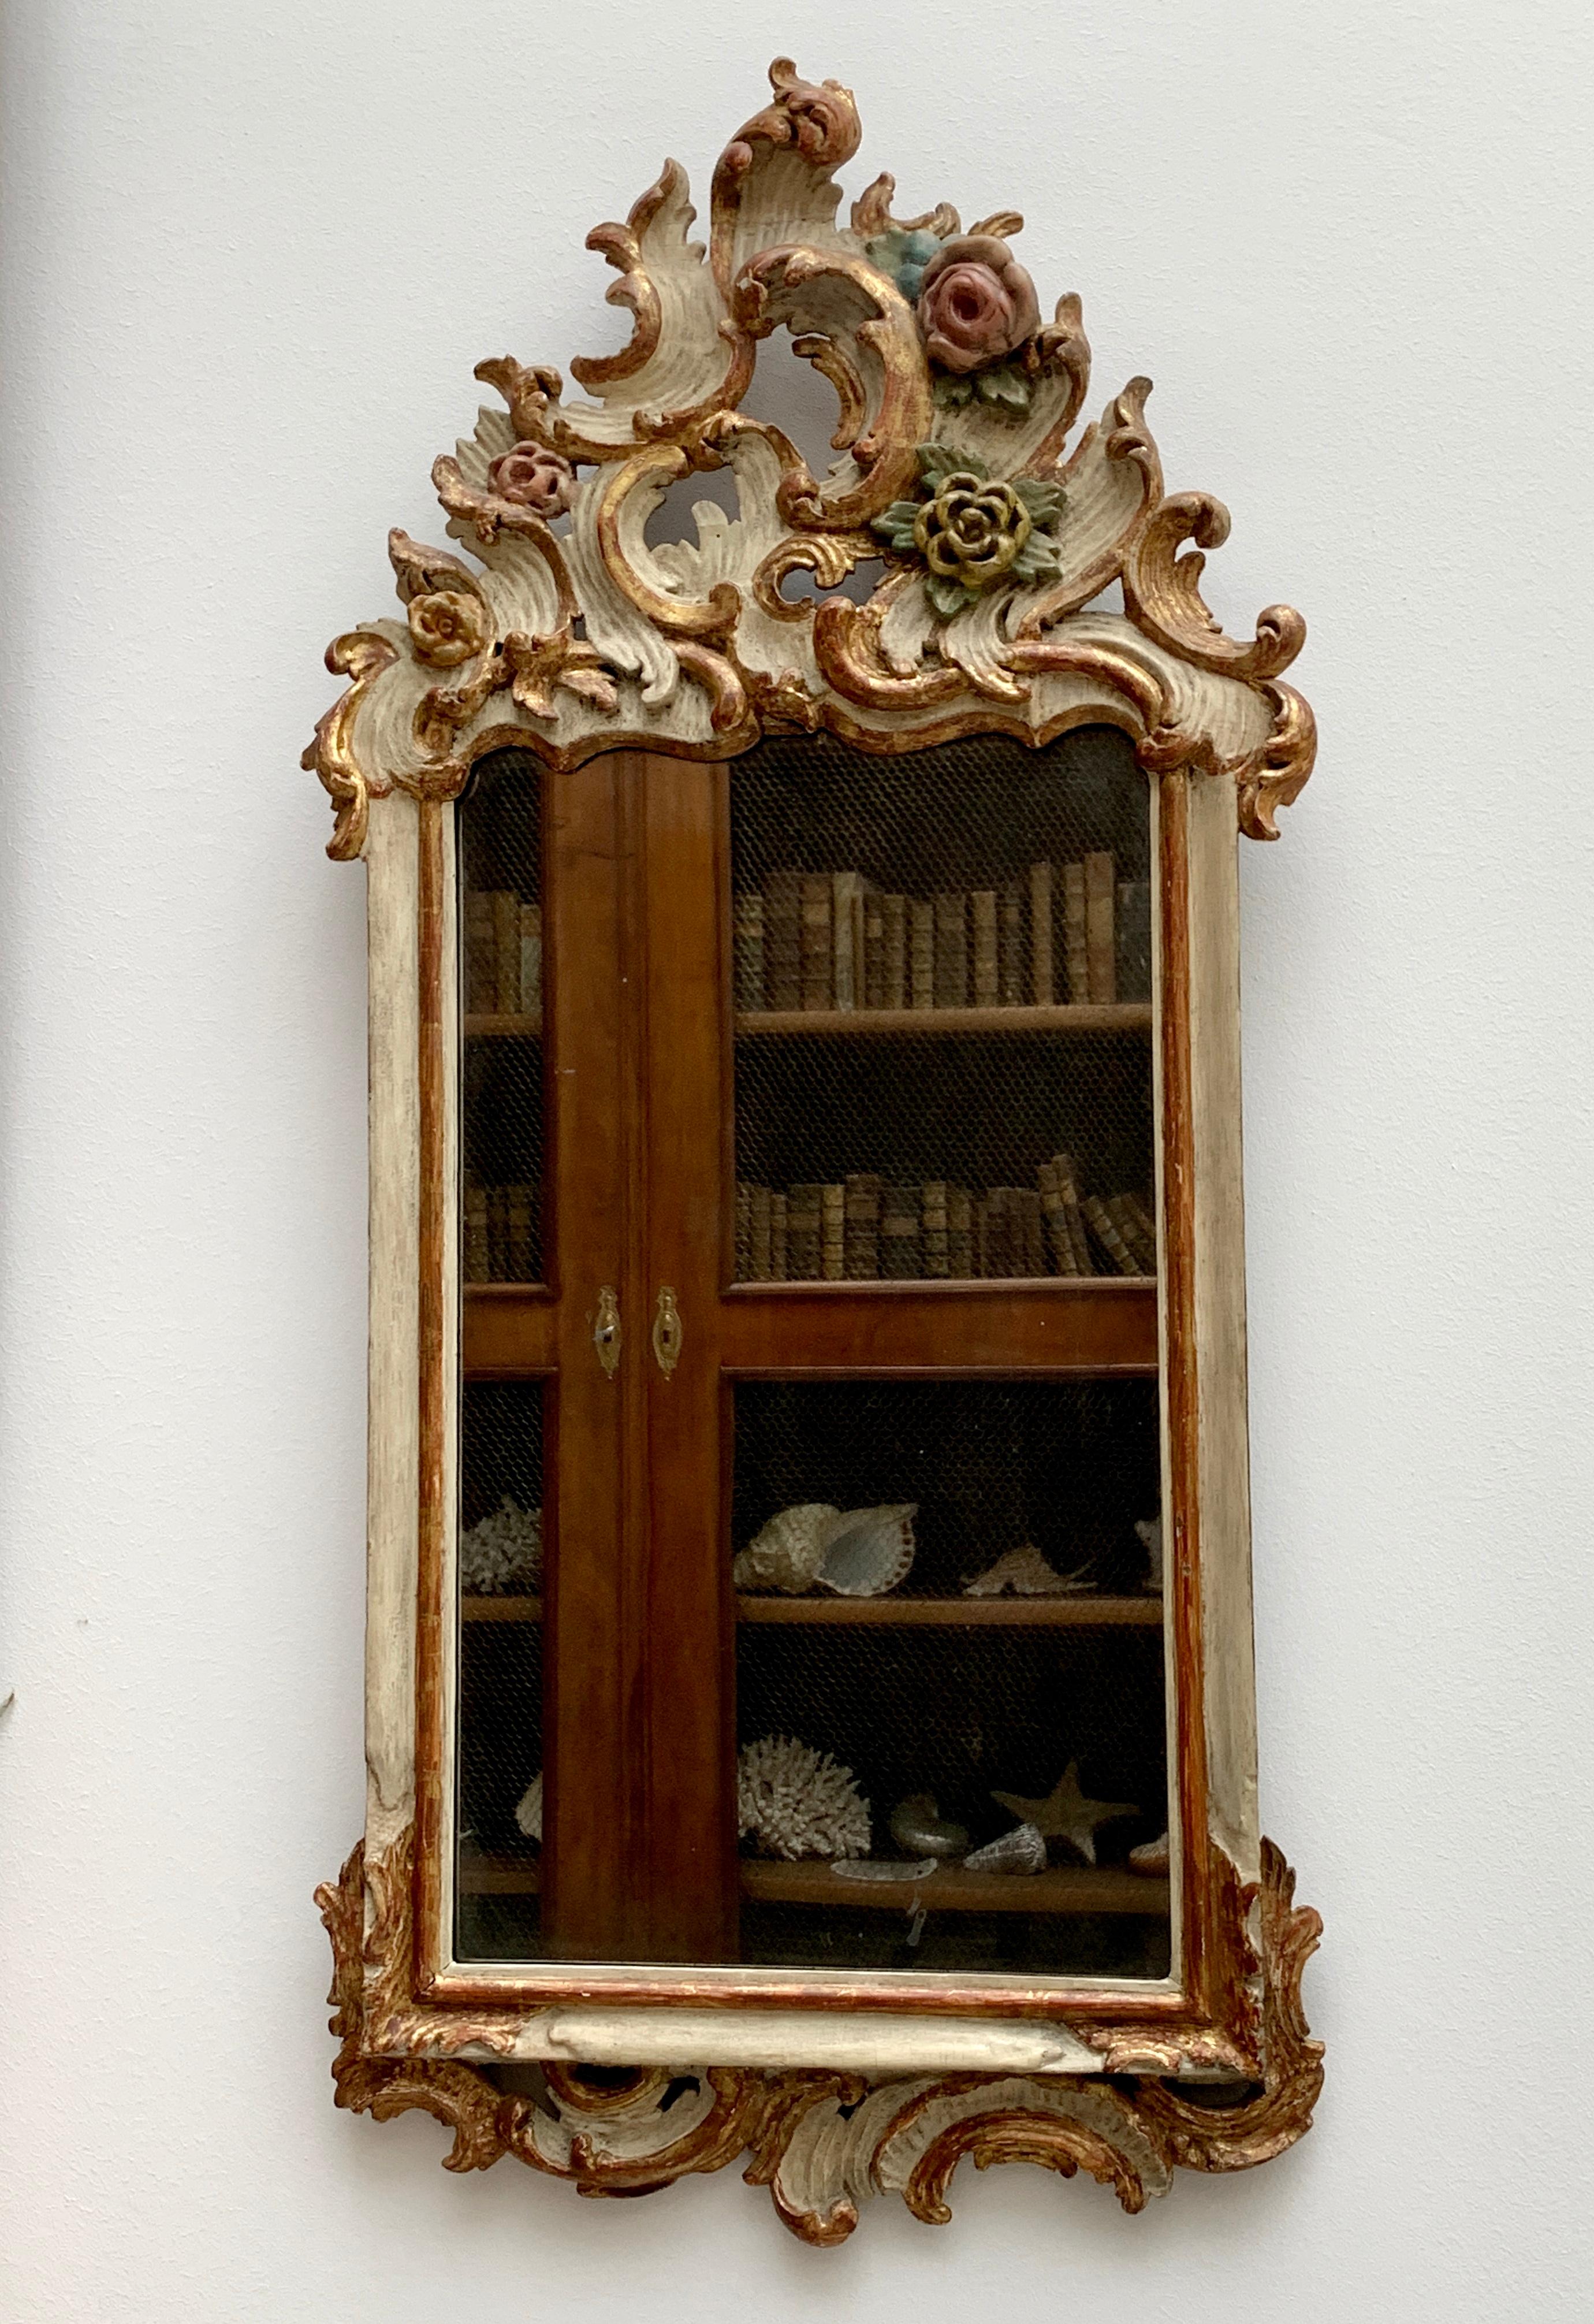 Very charming German 18th century period Rococo mirror. Beautifully carved with c-scrolls and flower buds, white and polychrome painted. Antique mirror plate and orginal back.